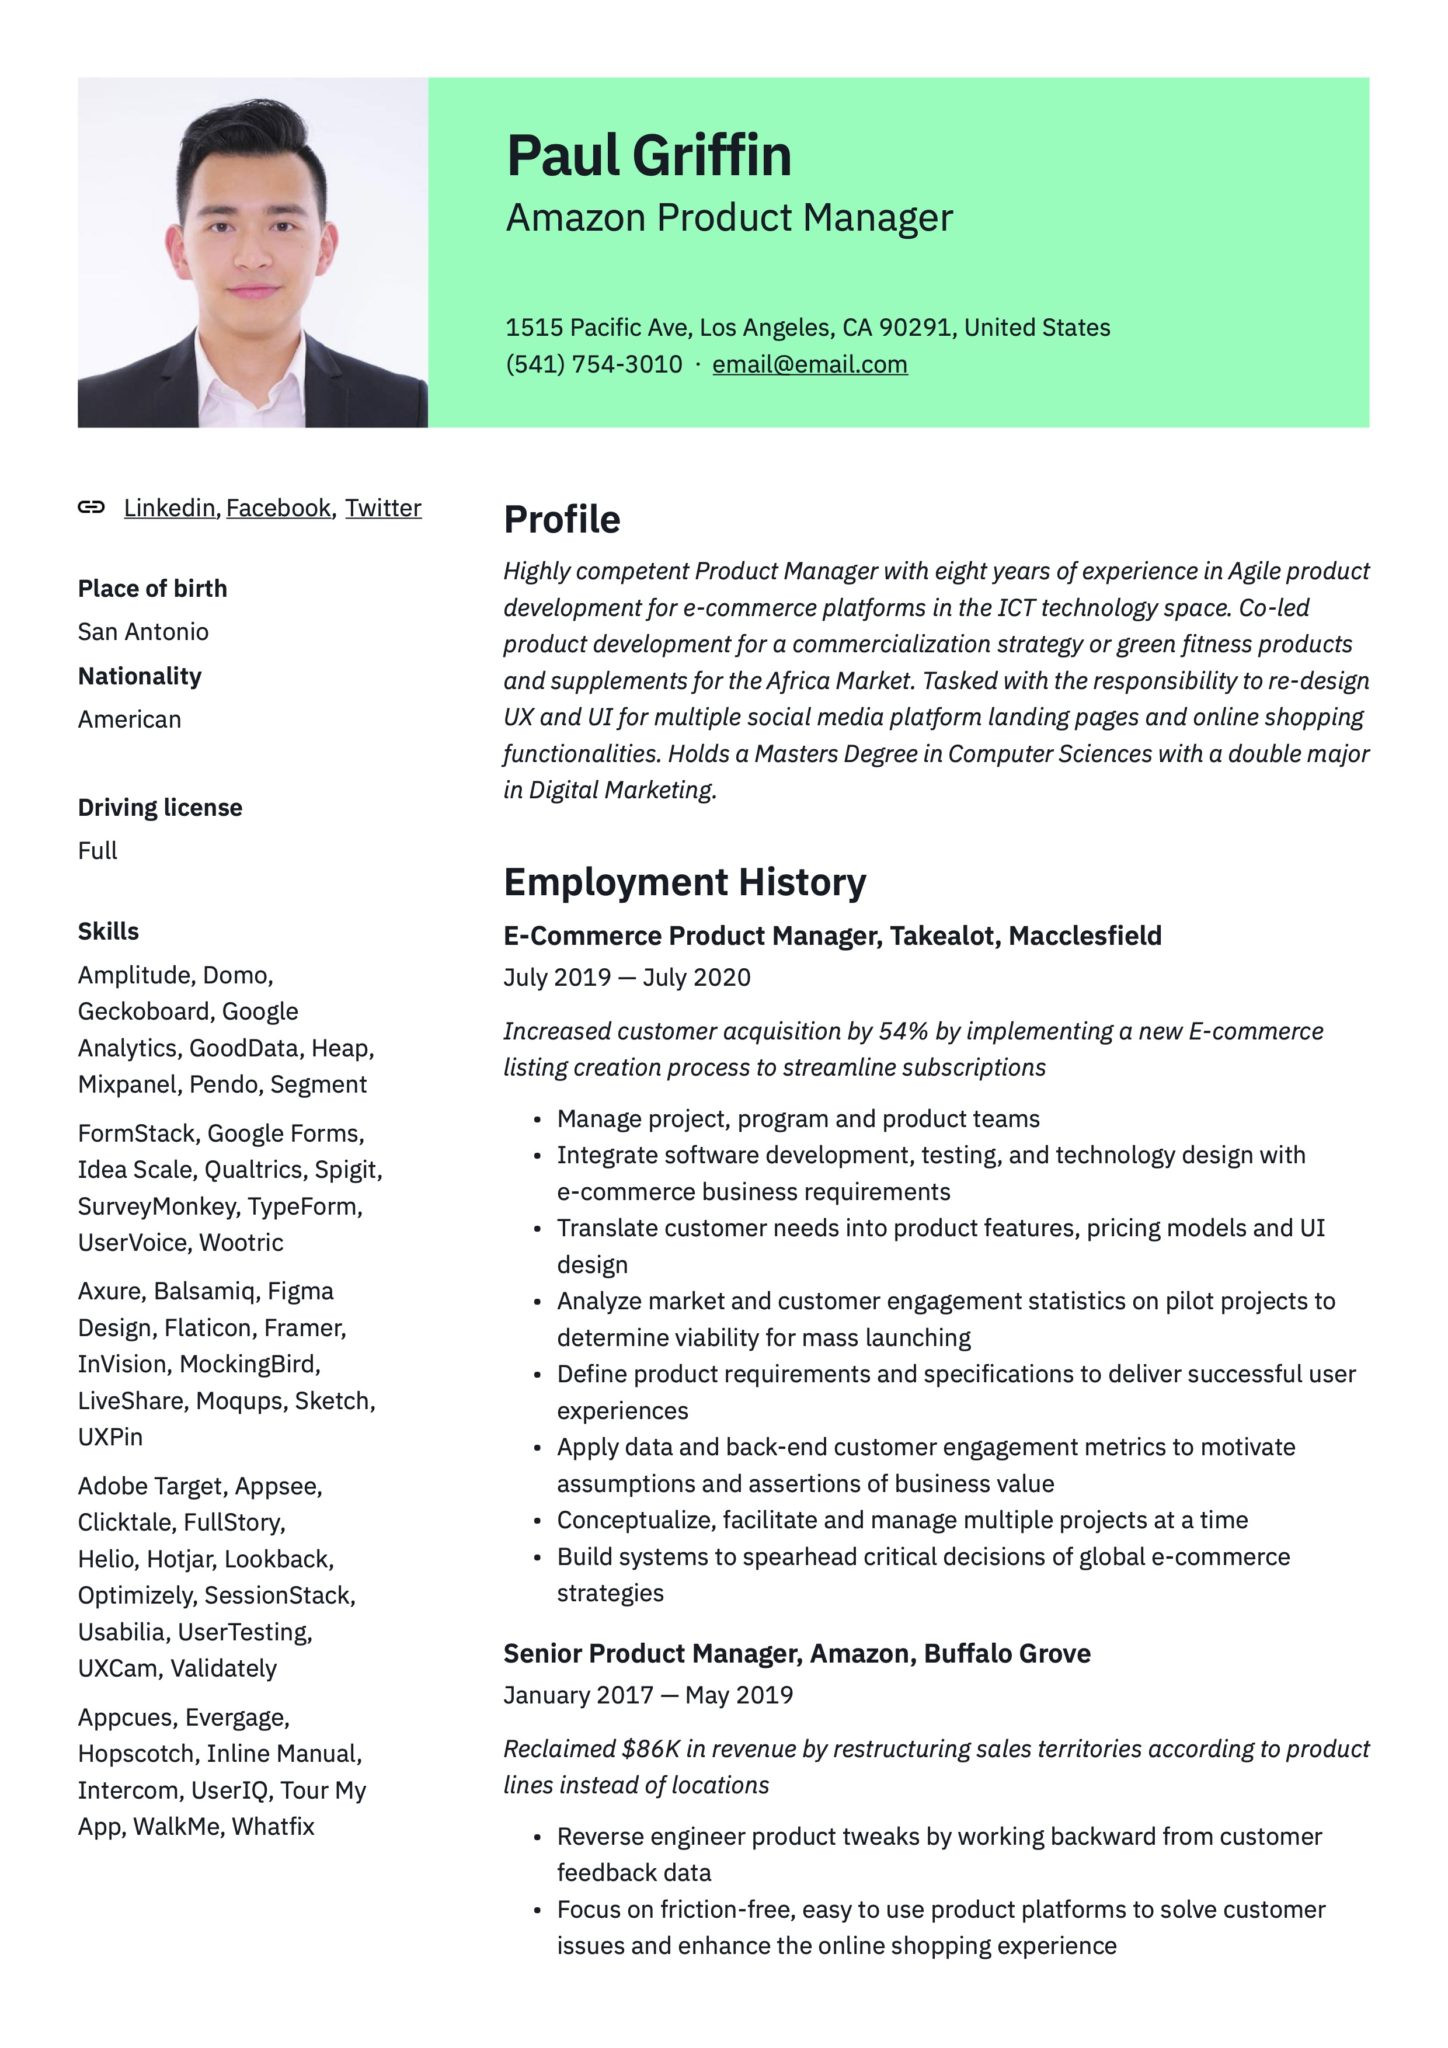 General Laborer at A Potatoes C9mpany Resume Sample Amazon Product Manager Resume & Guide 17 Examples 2022